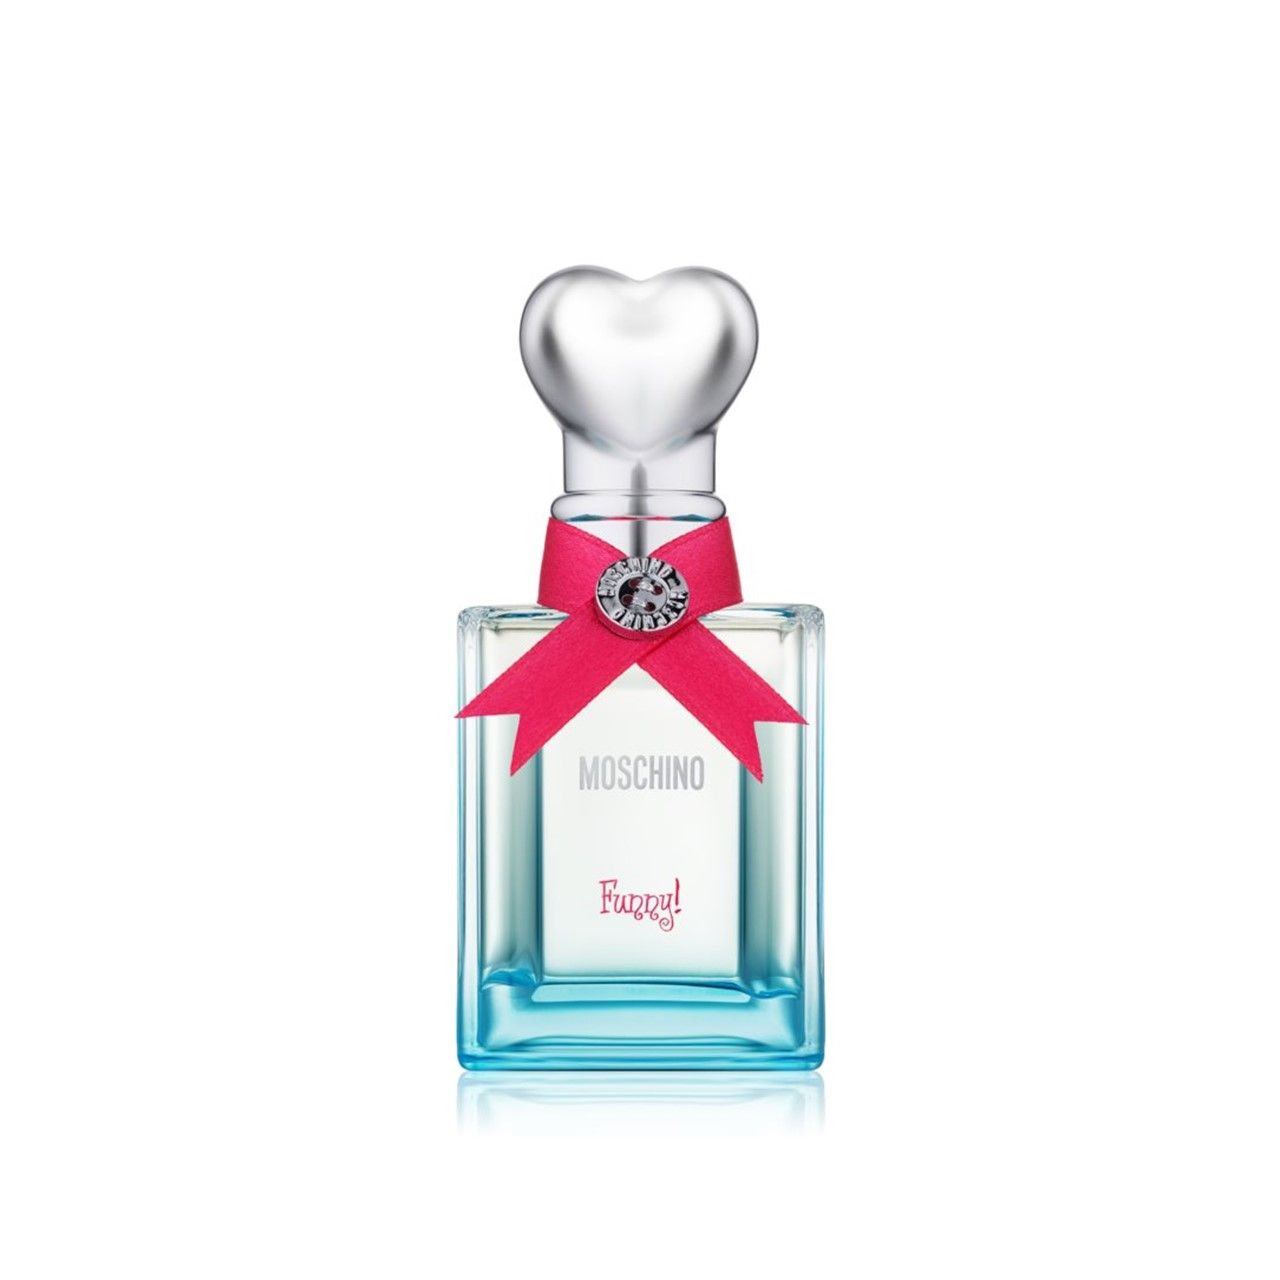 Moschino funny Lady EDT 50 ml-. Moschino funny 100ml EDT Test. Moschino funny Eau de Toilette 100 мл. Moschino funny! EDT, 100 ml. Москино фанни женские